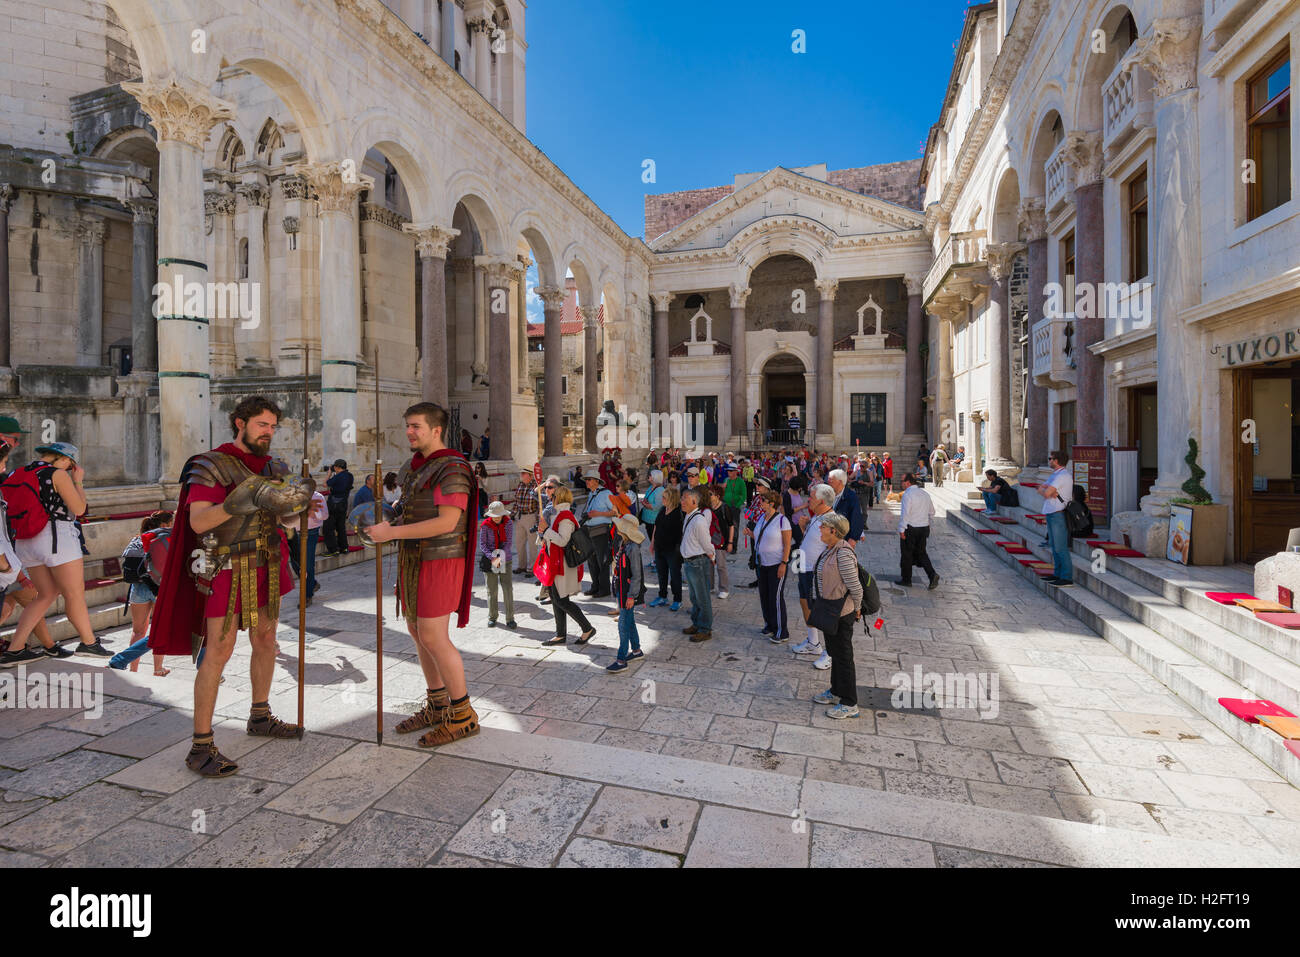 Two men dressed as roman soldiers stand in the Peristil in Diocletian's Palace where tourists take photos and admire the history Stock Photo